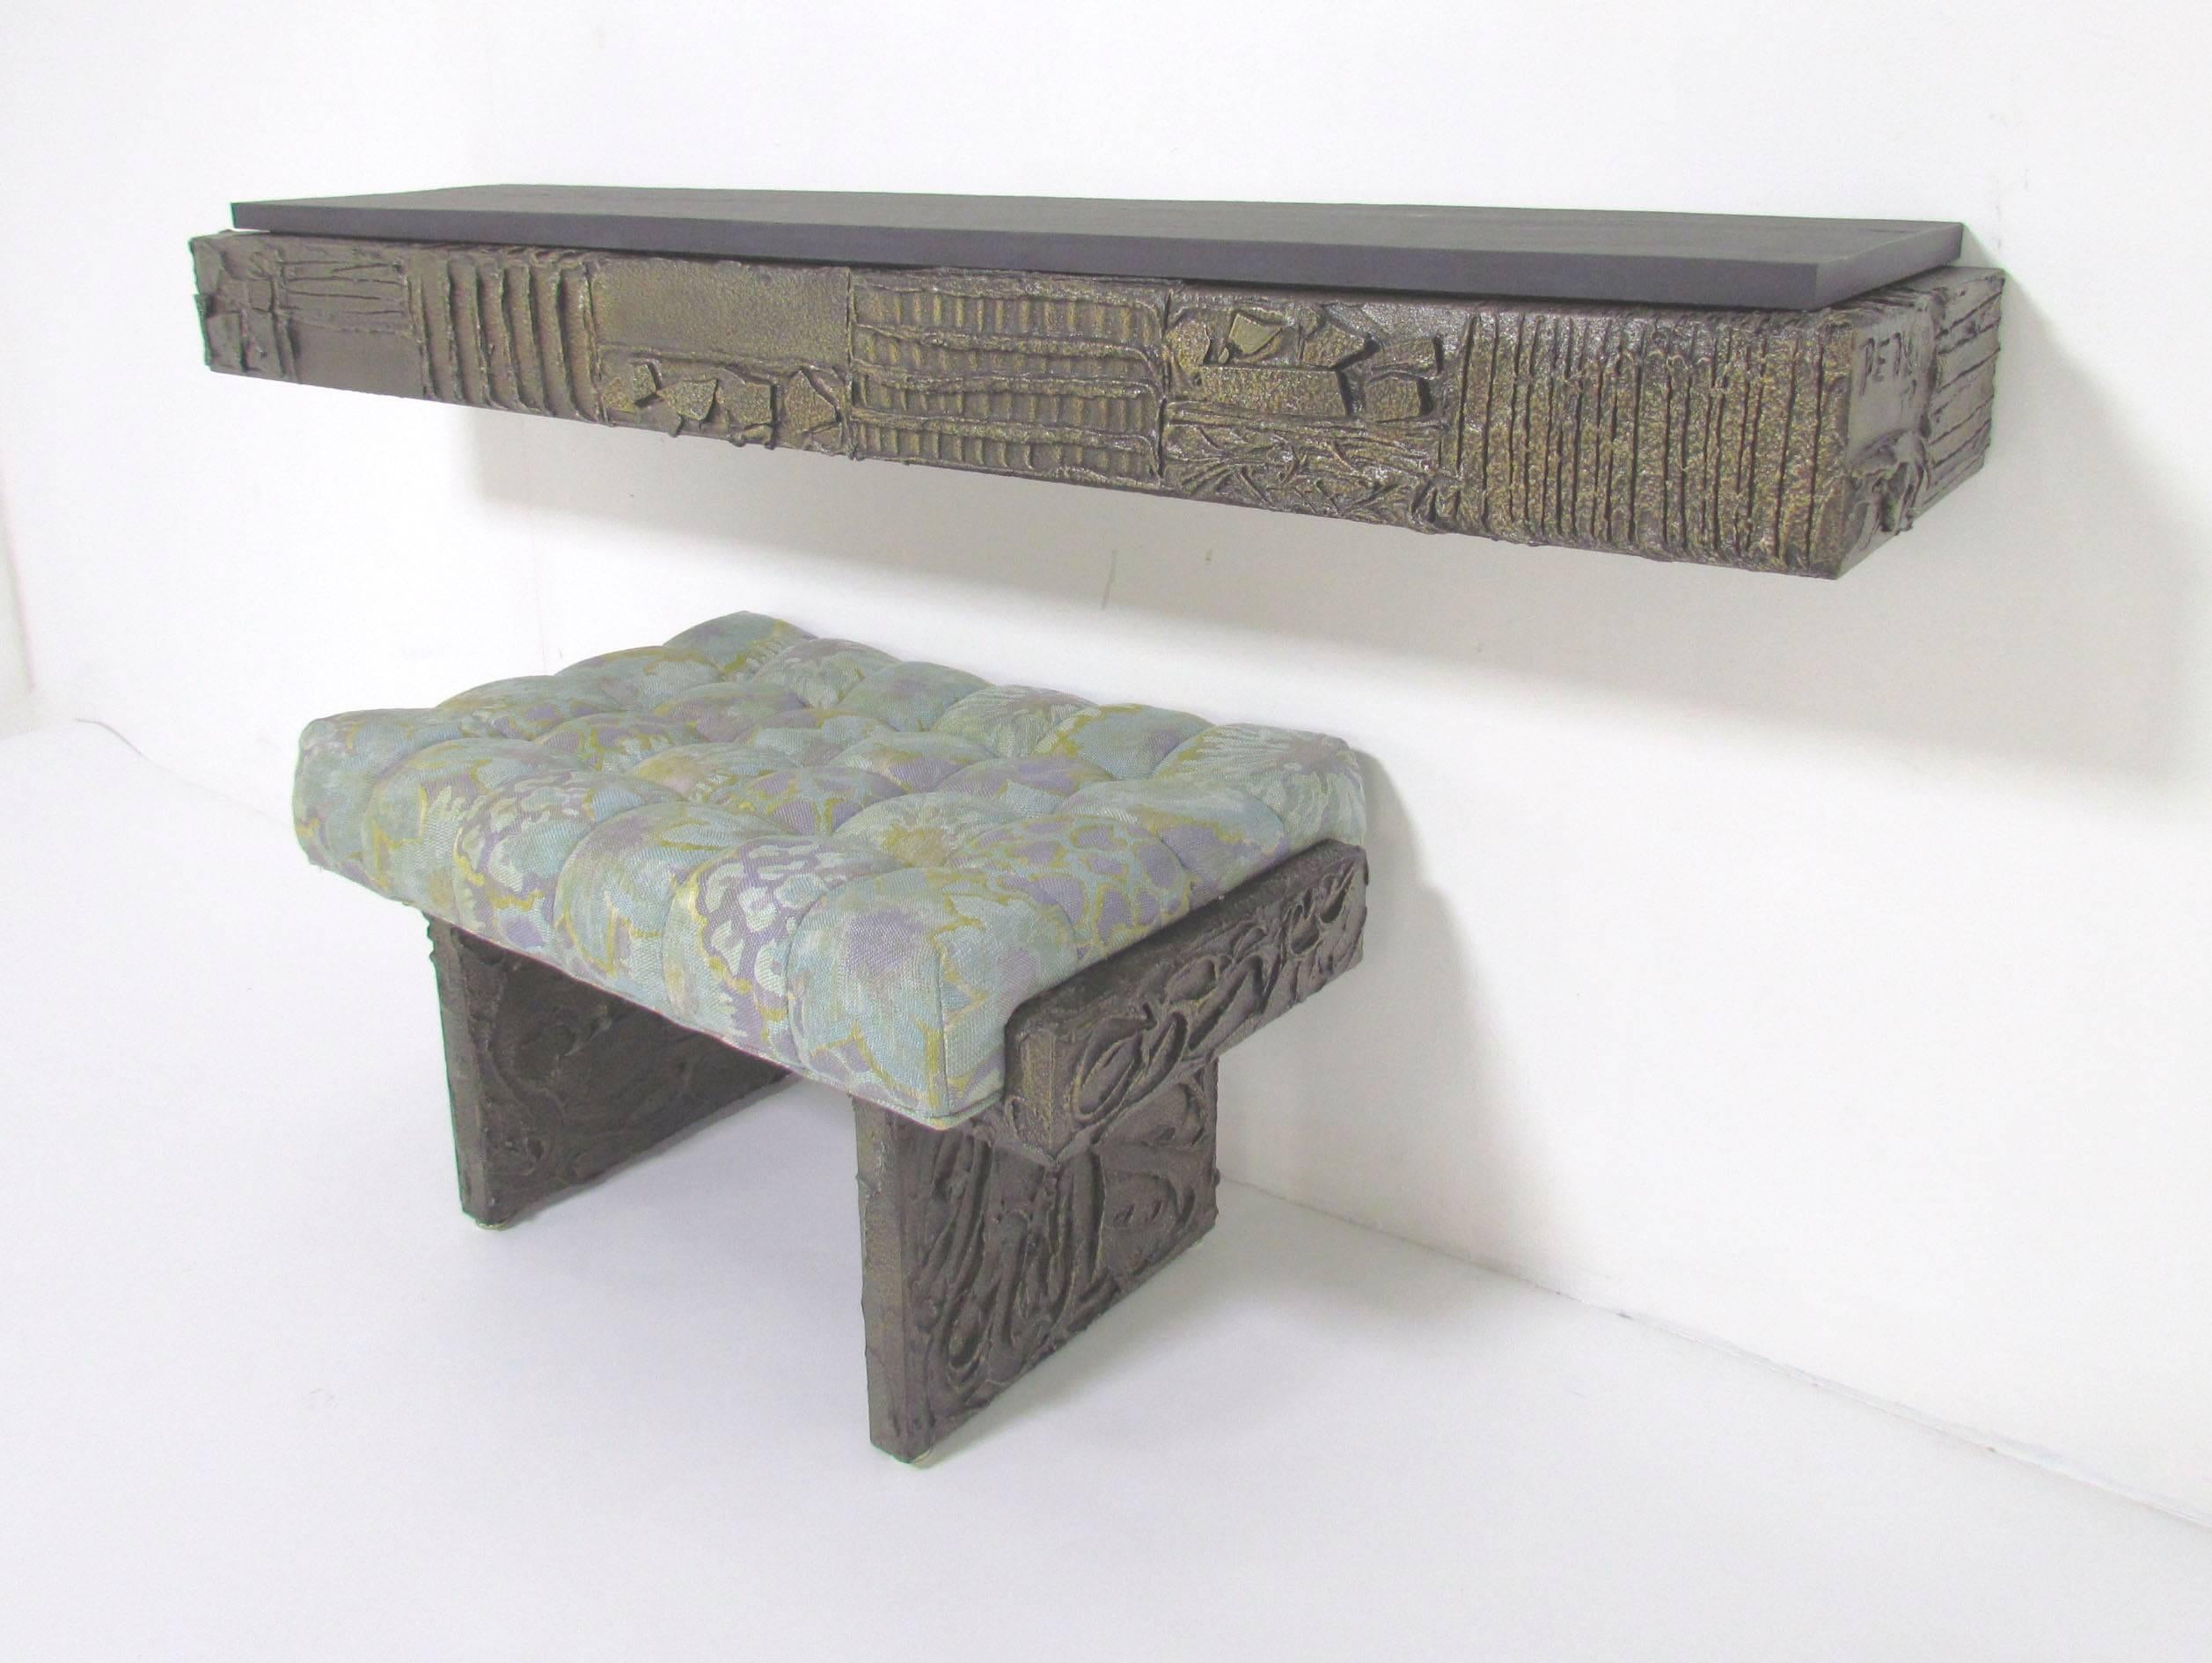 Epoxy Resin Sculpted Bronze Brutalist Single Bench by Paul Evans, Dated 1974